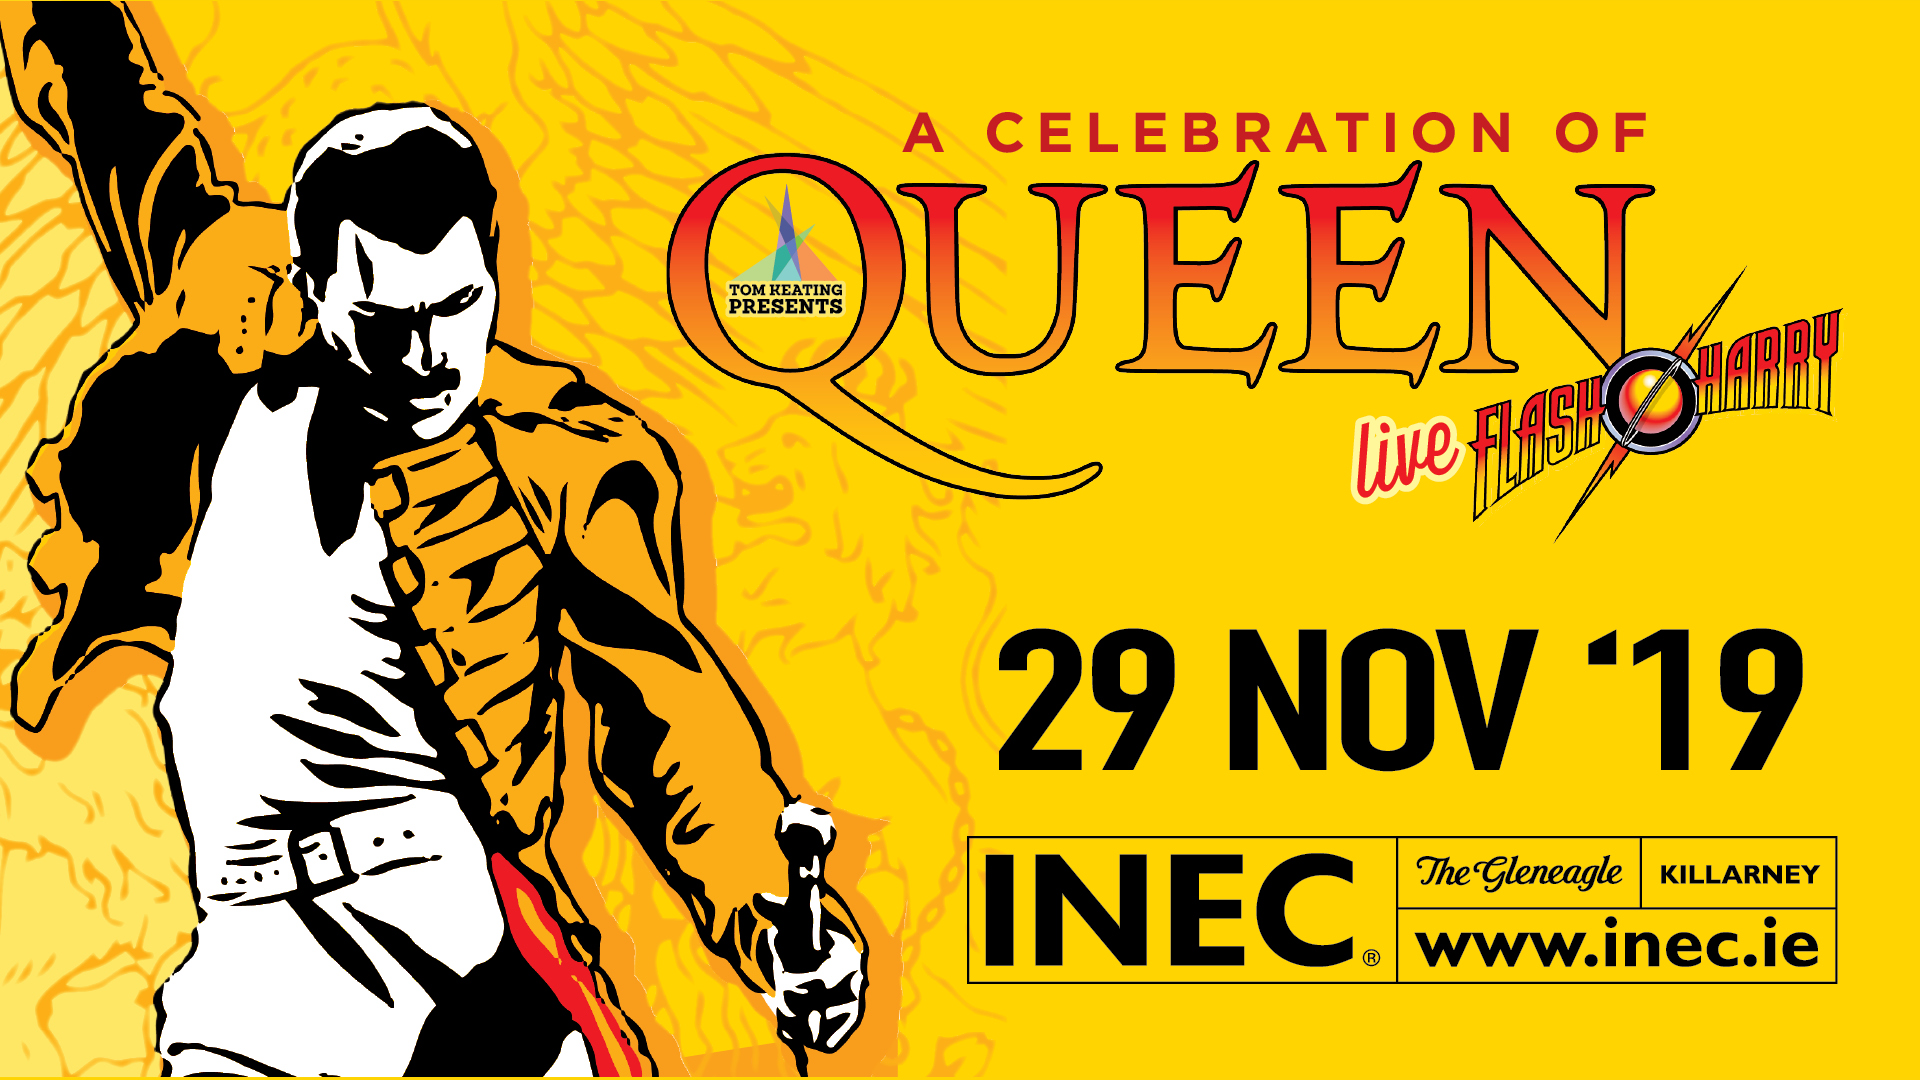 Flash Harry A Celebration of Queen LIVE comes to the INEC Killarney on November 29th 2019